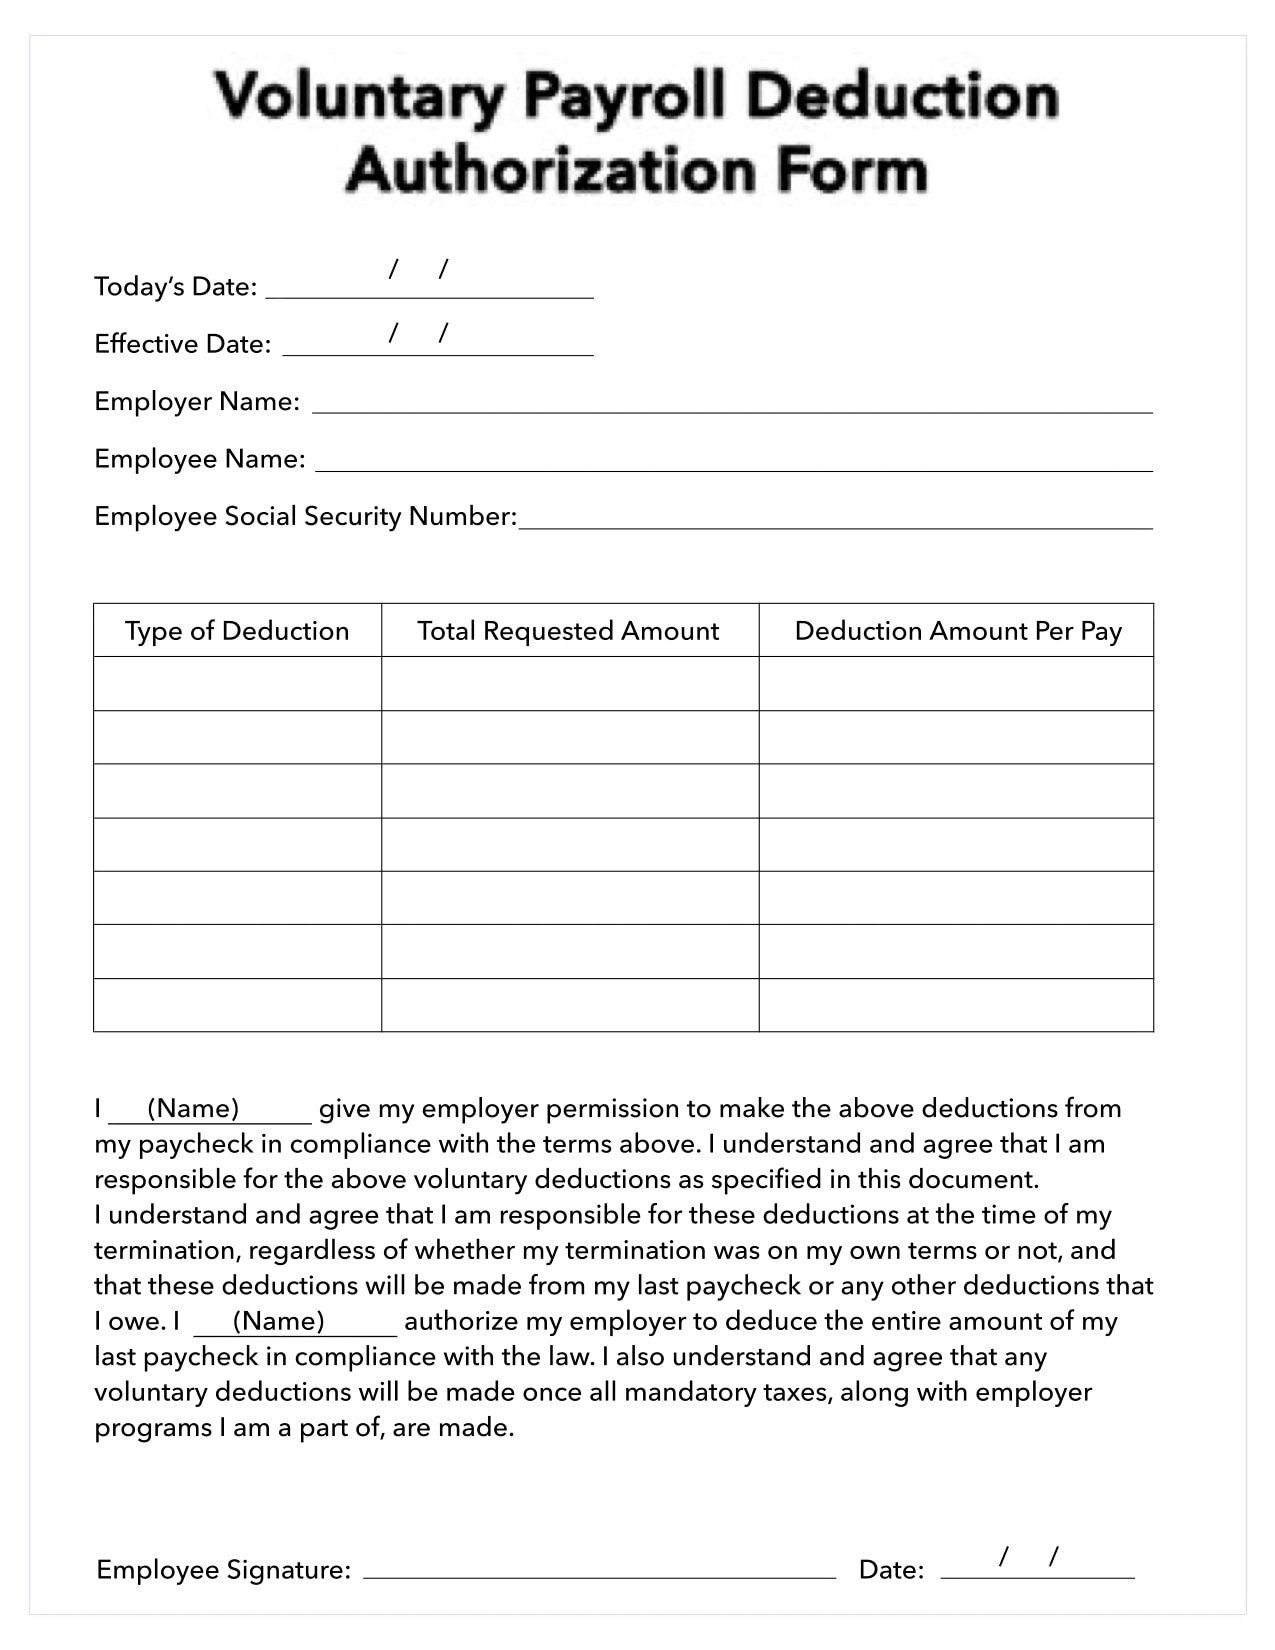 Payroll deduction authorization form example